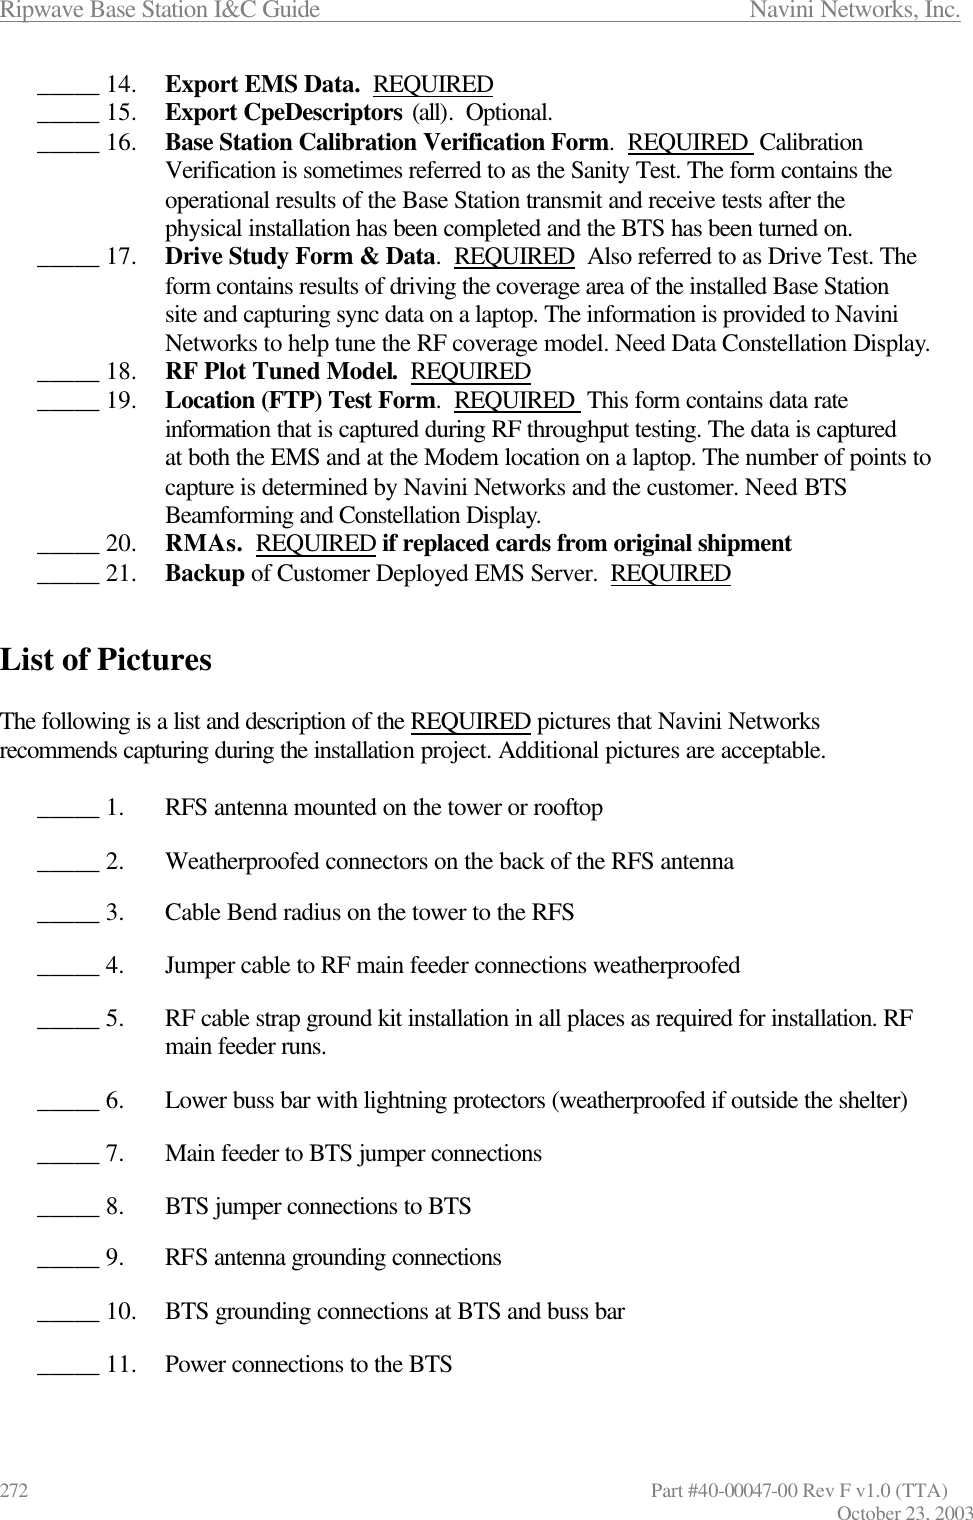 Ripwave Base Station I&amp;C Guide                      Navini Networks, Inc. 272                   Part #40-00047-00 Rev F v1.0 (TTA) October 23, 2003 _____ 14.  Export EMS Data.  REQUIRED _____ 15.  Export CpeDescriptors (all).  Optional. _____ 16.  Base Station Calibration Verification Form.  REQUIRED  Calibration Verification is sometimes referred to as the Sanity Test. The form contains the operational results of the Base Station transmit and receive tests after the physical installation has been completed and the BTS has been turned on.  _____ 17.  Drive Study Form &amp; Data.  REQUIRED  Also referred to as Drive Test. The form contains results of driving the coverage area of the installed Base Station site and capturing sync data on a laptop. The information is provided to Navini Networks to help tune the RF coverage model. Need Data Constellation Display. _____ 18.  RF Plot Tuned Model.  REQUIRED _____ 19.  Location (FTP) Test Form.  REQUIRED  This form contains data rate information that is captured during RF throughput testing. The data is captured at both the EMS and at the Modem location on a laptop. The number of points to capture is determined by Navini Networks and the customer. Need BTS Beamforming and Constellation Display. _____ 20.  RMAs.  REQUIRED if replaced cards from original shipment _____ 21.  Backup of Customer Deployed EMS Server.  REQUIRED   List of Pictures  The following is a list and description of the REQUIRED pictures that Navini Networks recommends capturing during the installation project. Additional pictures are acceptable.  _____ 1.  RFS antenna mounted on the tower or rooftop  _____ 2.  Weatherproofed connectors on the back of the RFS antenna  _____ 3.  Cable Bend radius on the tower to the RFS  _____ 4.  Jumper cable to RF main feeder connections weatherproofed  _____ 5.  RF cable strap ground kit installation in all places as required for installation. RF main feeder runs.  _____ 6.  Lower buss bar with lightning protectors (weatherproofed if outside the shelter)  _____ 7.  Main feeder to BTS jumper connections  _____ 8.  BTS jumper connections to BTS  _____ 9.  RFS antenna grounding connections  _____ 10.  BTS grounding connections at BTS and buss bar  _____ 11.  Power connections to the BTS  